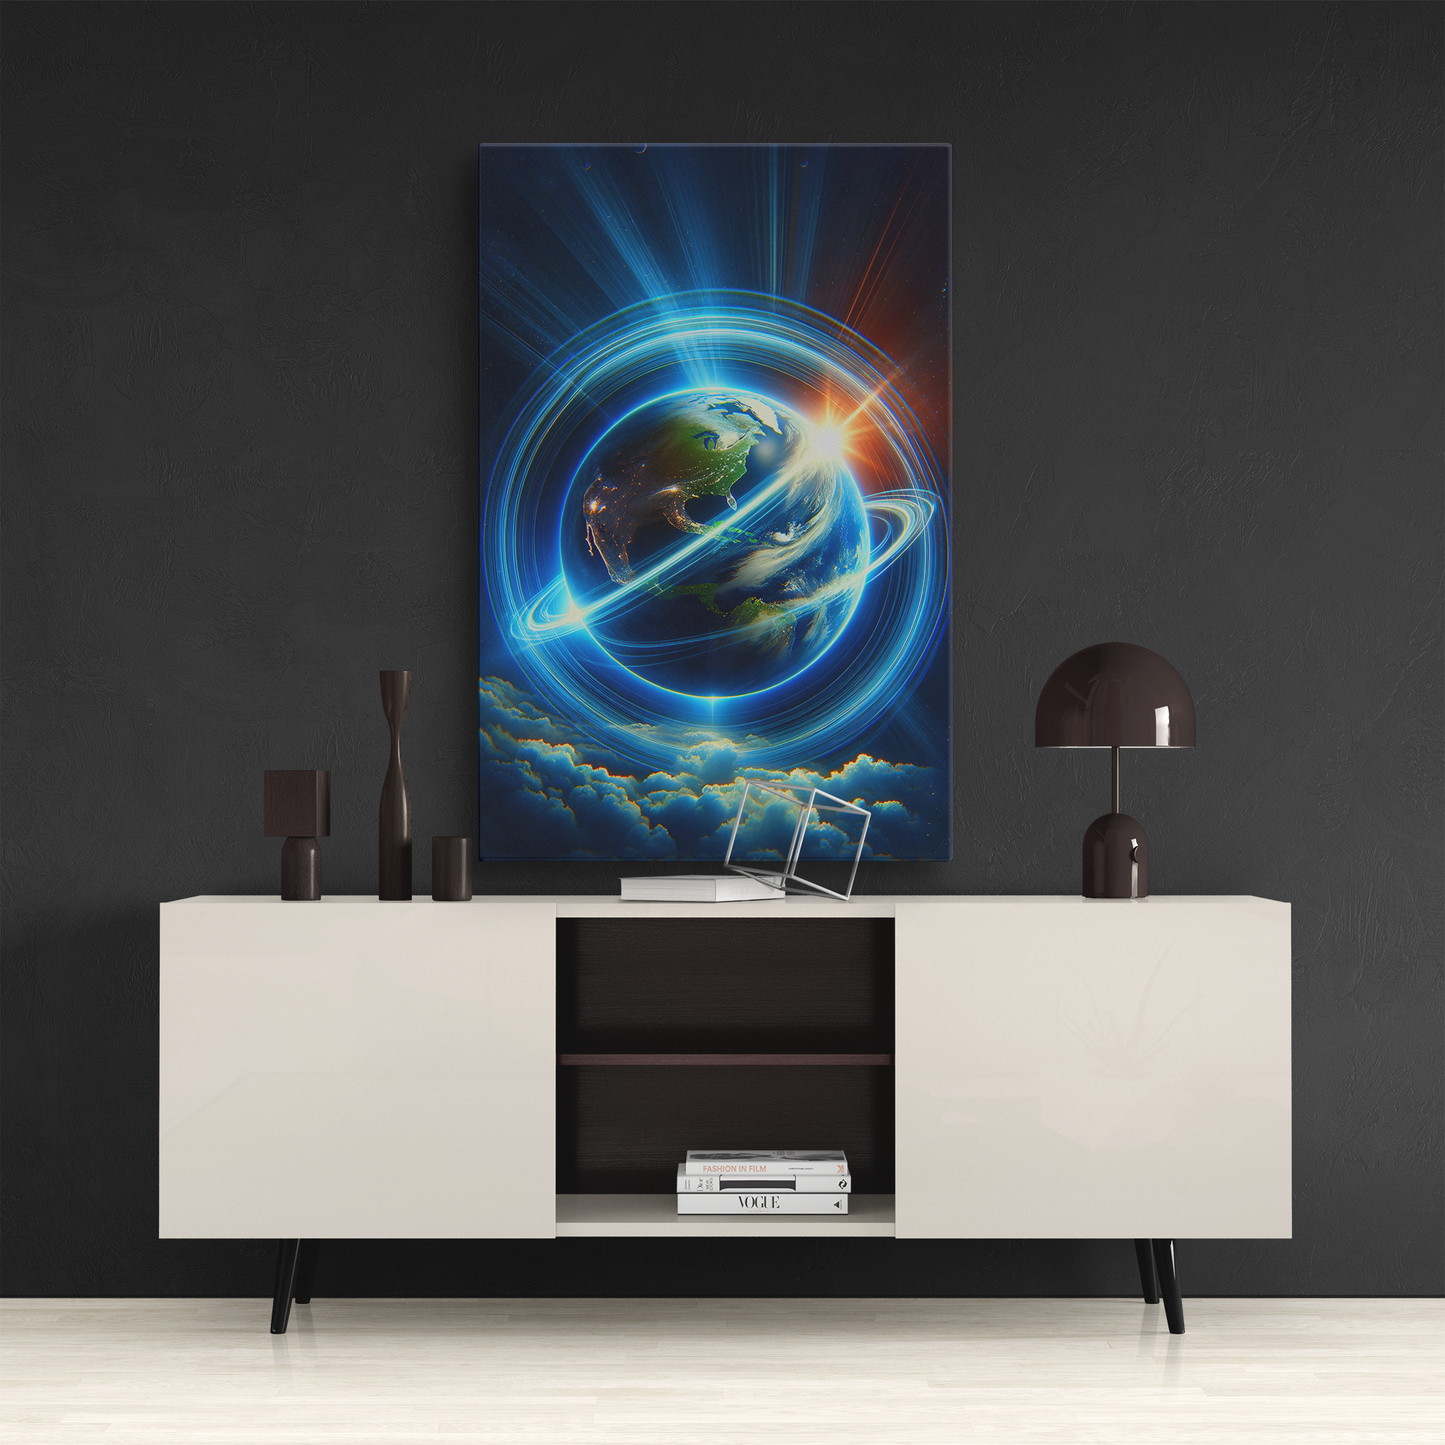 Luminous Earth Odyssey (Canvas)Luminous Earth Odyssey (Canvas  Matte finish, stretched, with a depth of 1.25 inches)
Struggling with low-quality canvases? Switch to RimaGallery! Our canvases are mRimaGallery